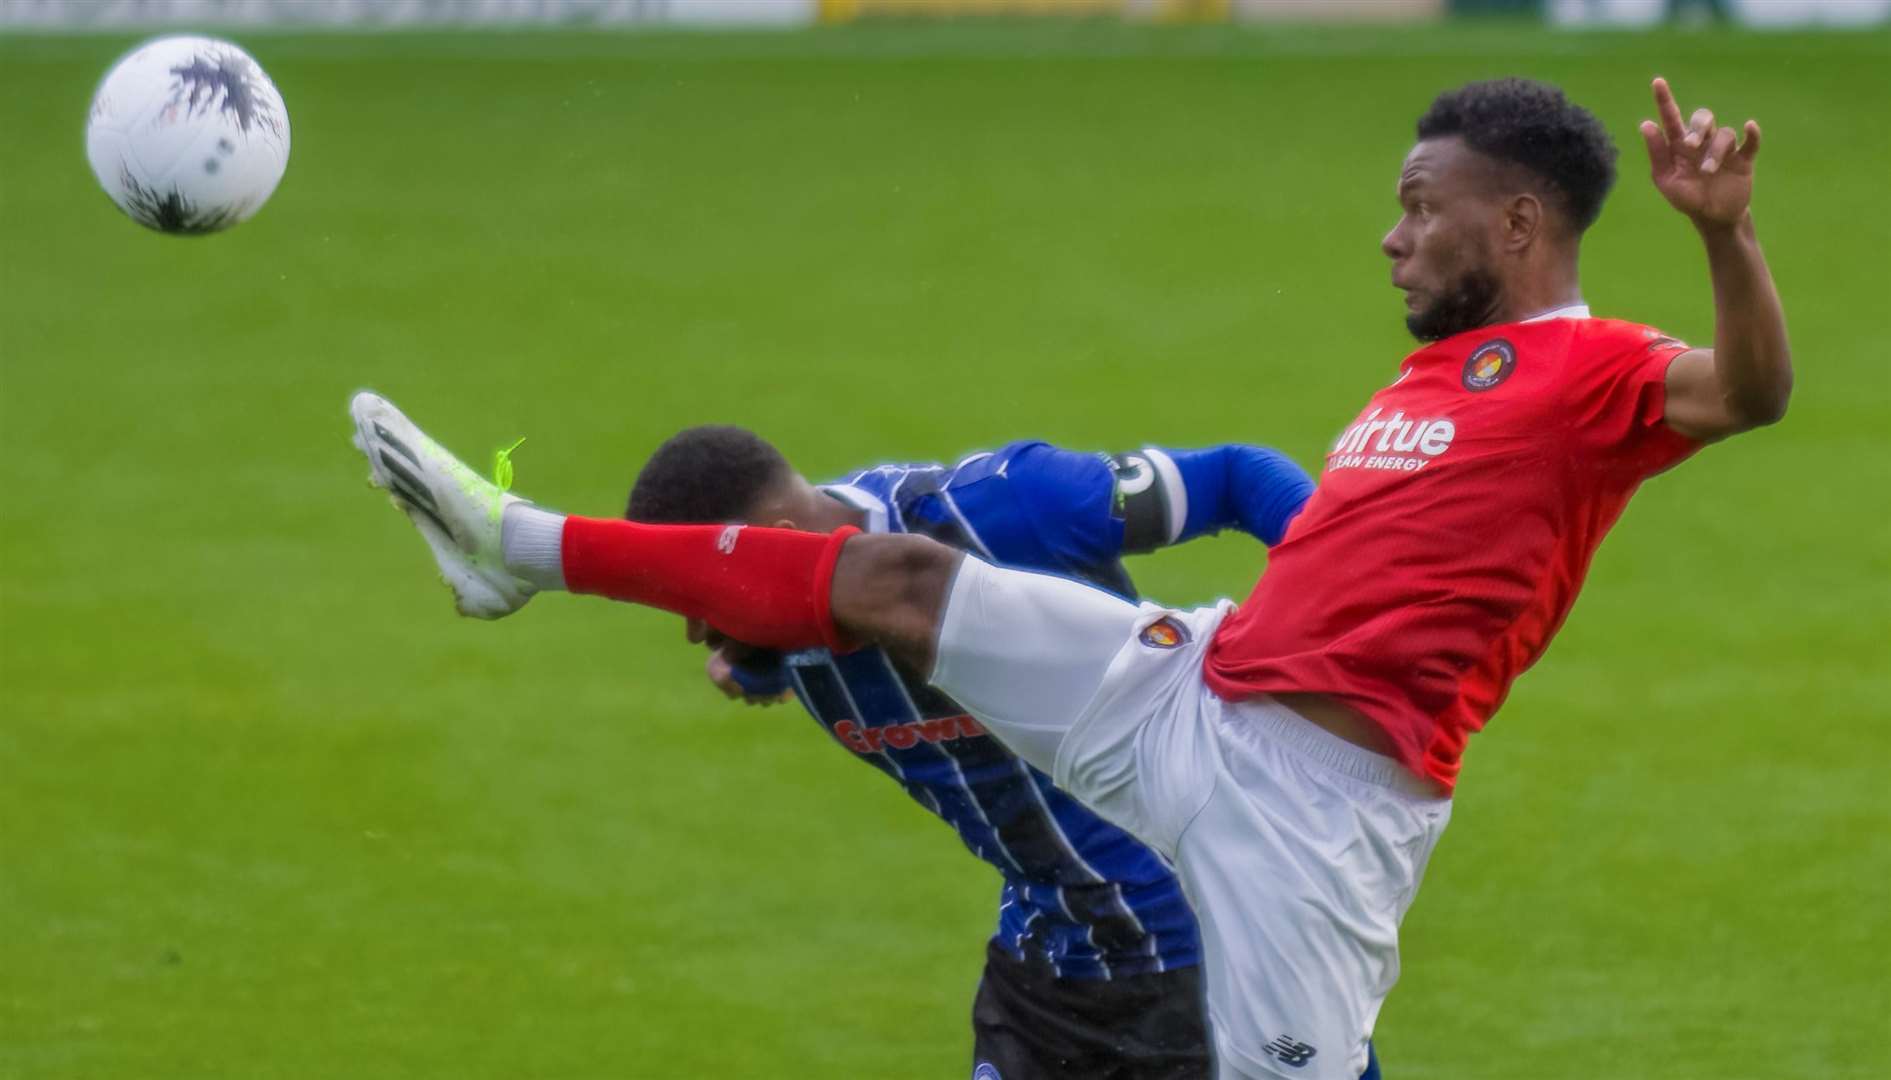 Ebbsfleet’s Shaq Coulthirst in action at Rochdale on the opening day of the season. Picture: Ed Miller/EUFC